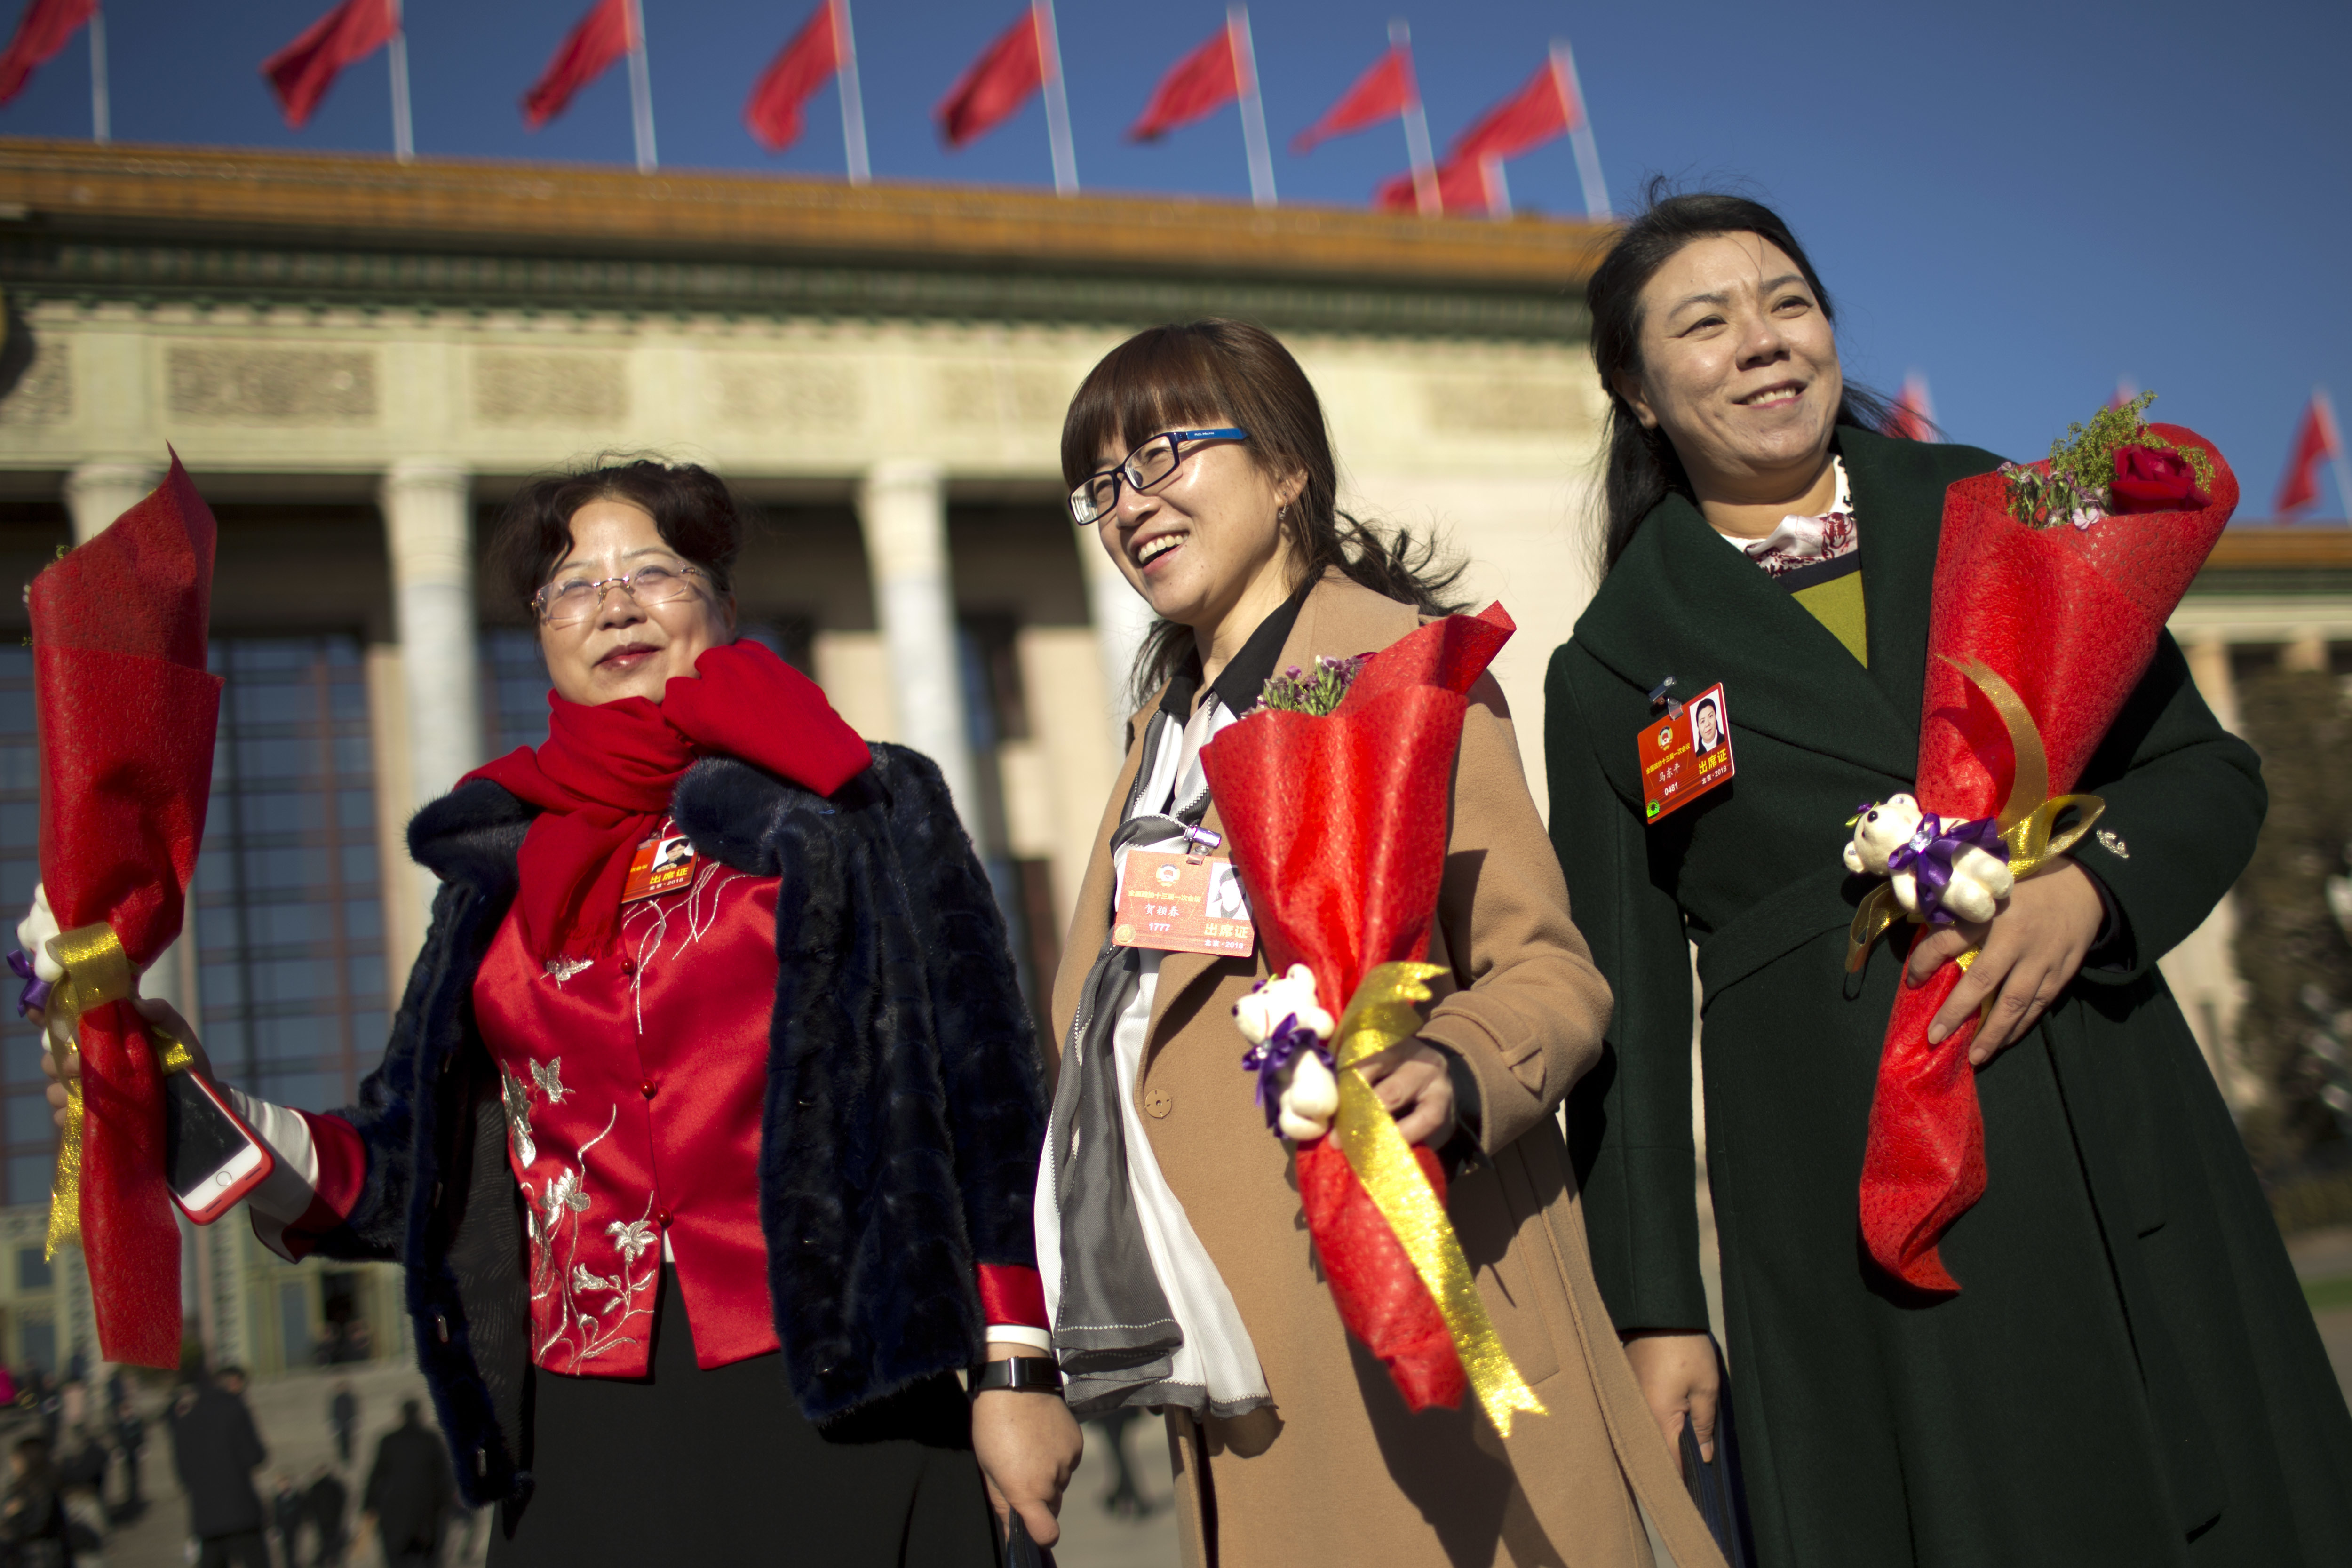 Delegates hold flower bouquets for International Women's Day as they arrive for a plenary session of the Chinese People's Political Consultative Conference (CPPCC) at the Great Hall of the People in Beijing, Thursday, March 8, 2018. Students at China's prestigious Tsinghua University are celebrating International Women's Day with banners making light of a proposed constitutional amendment to scrap term limits for the country's president. (AP Photo/Mark Schiefelbein)